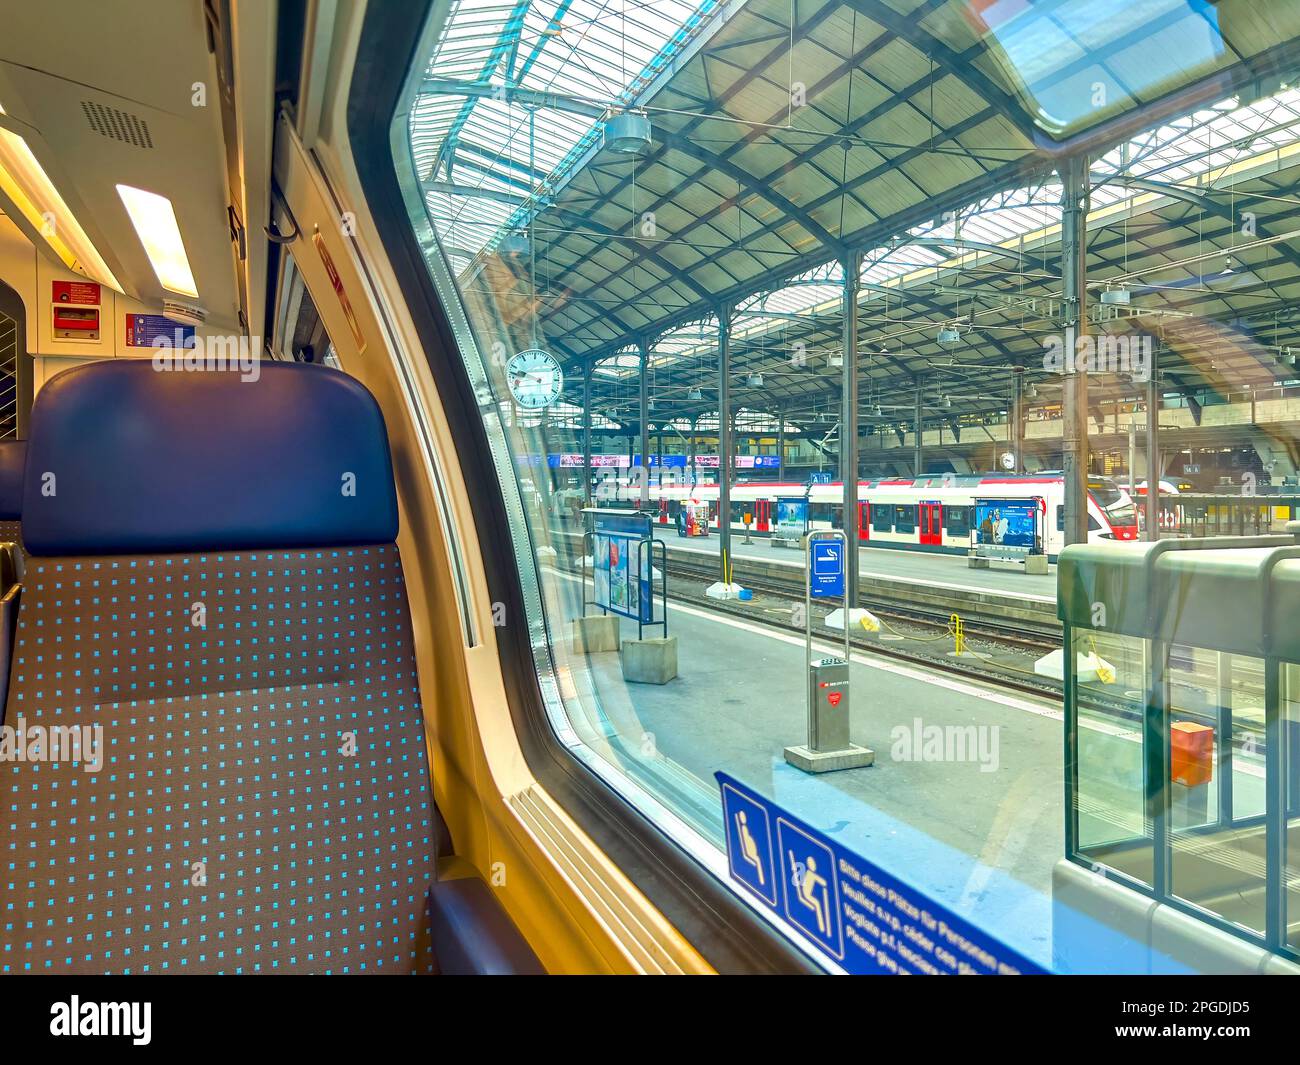 LUCERNE, SWITZERLAND - MARCH 31, 2022: In the train of Swiss Federal Railways on train station of Lucerne, on March 31 in Lucerne, Switzerland Stock Photo